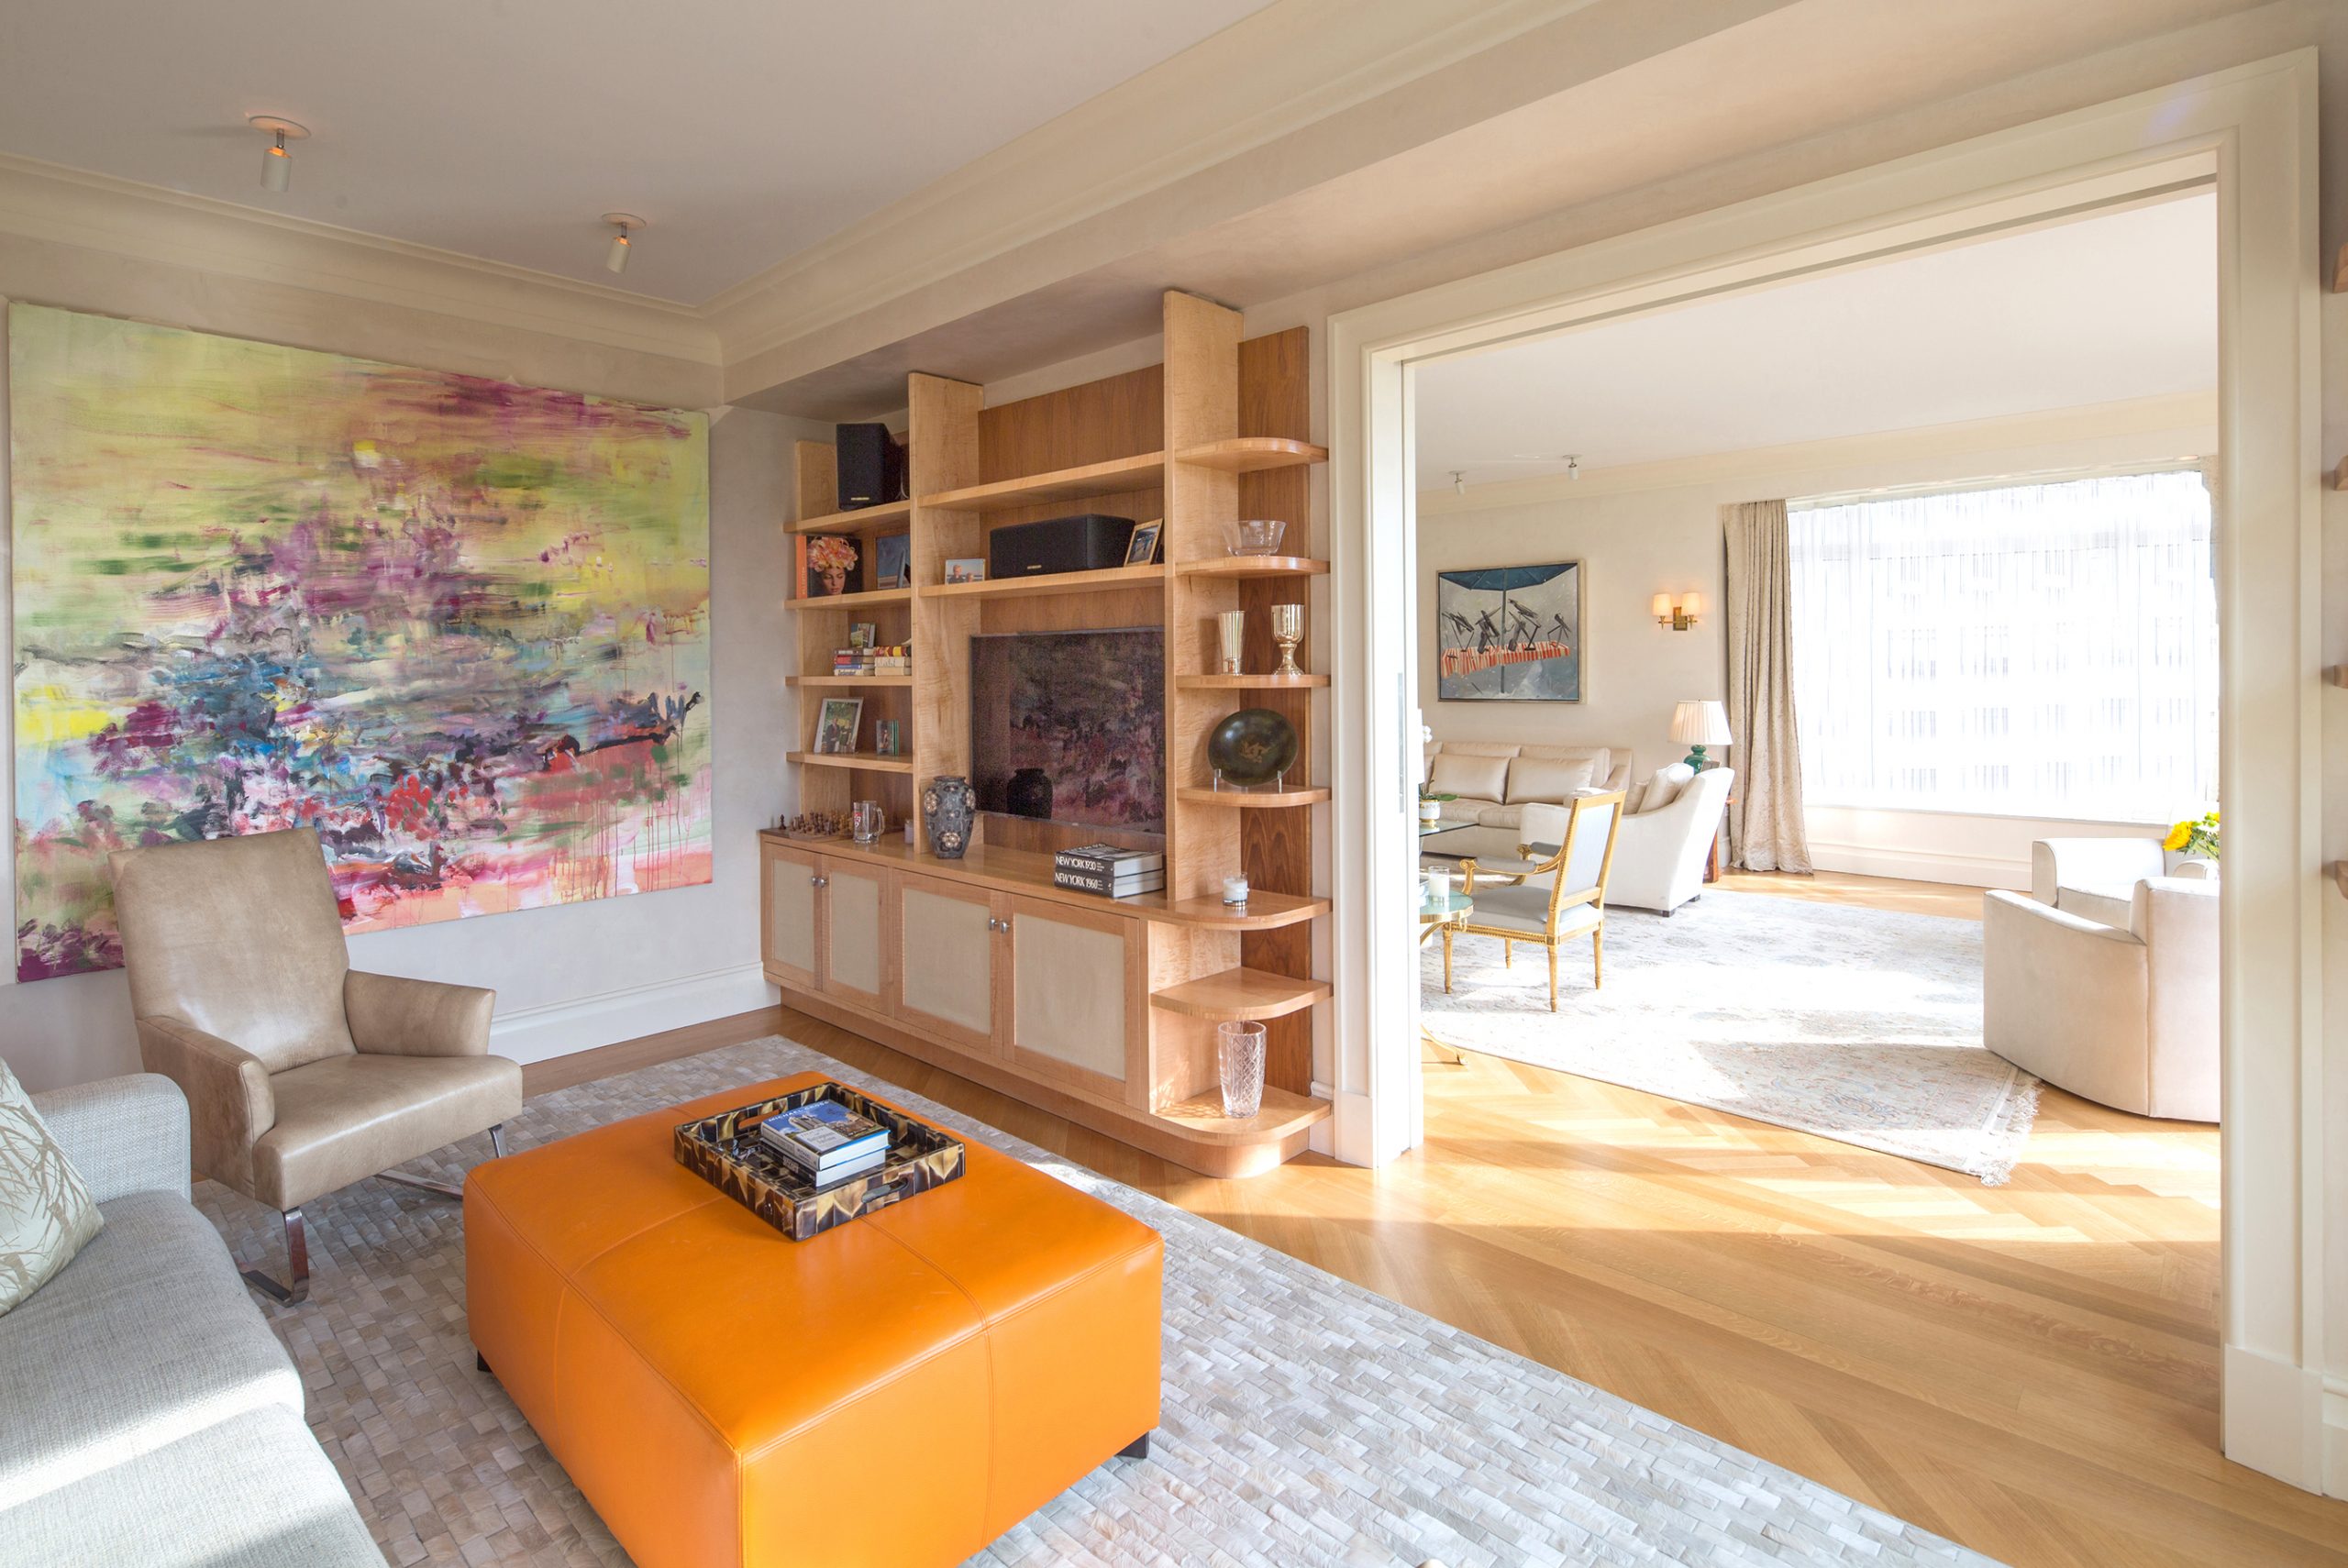 5 Central Park West, SLibrary Design by Interior designer Kevin Gray, Kevin Gray Design, Photo by Robin Hill